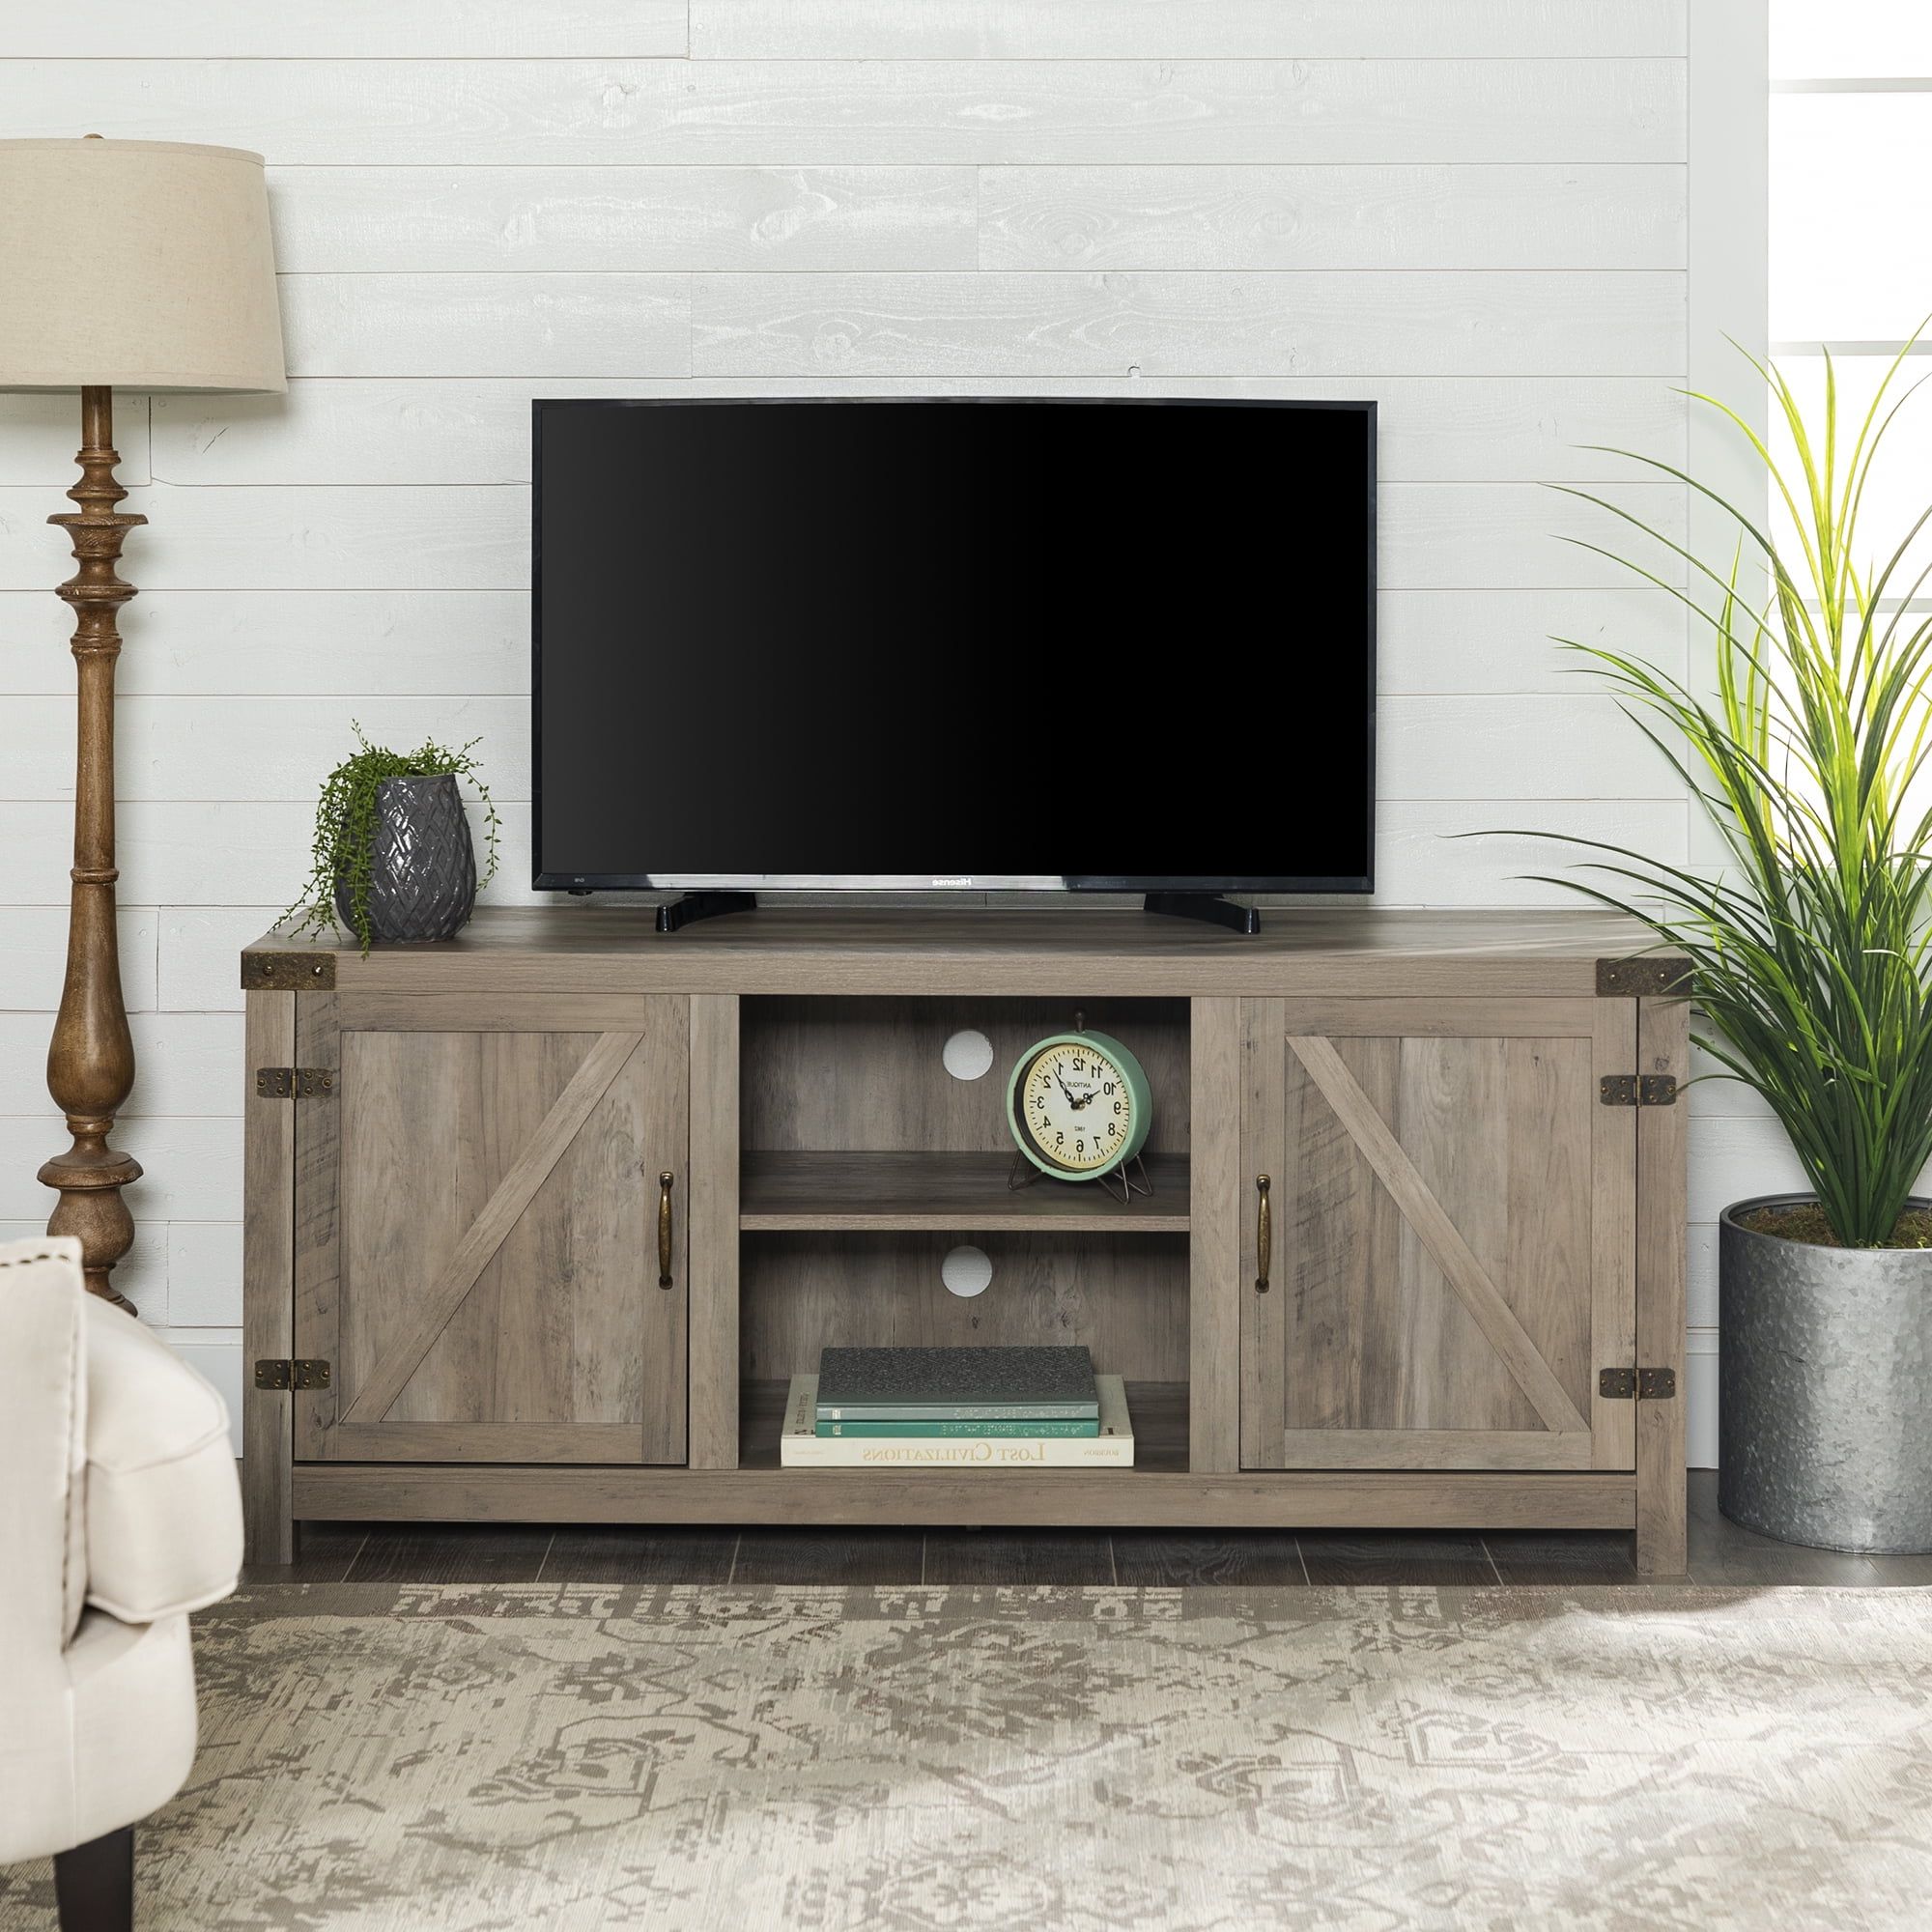 Modern Farmhouse Barn Tv Stands With Regard To Most Current Woven Paths Modern Farmhouse Barn Door Tv Stand For Tvs Up To 65", Grey (View 11 of 15)